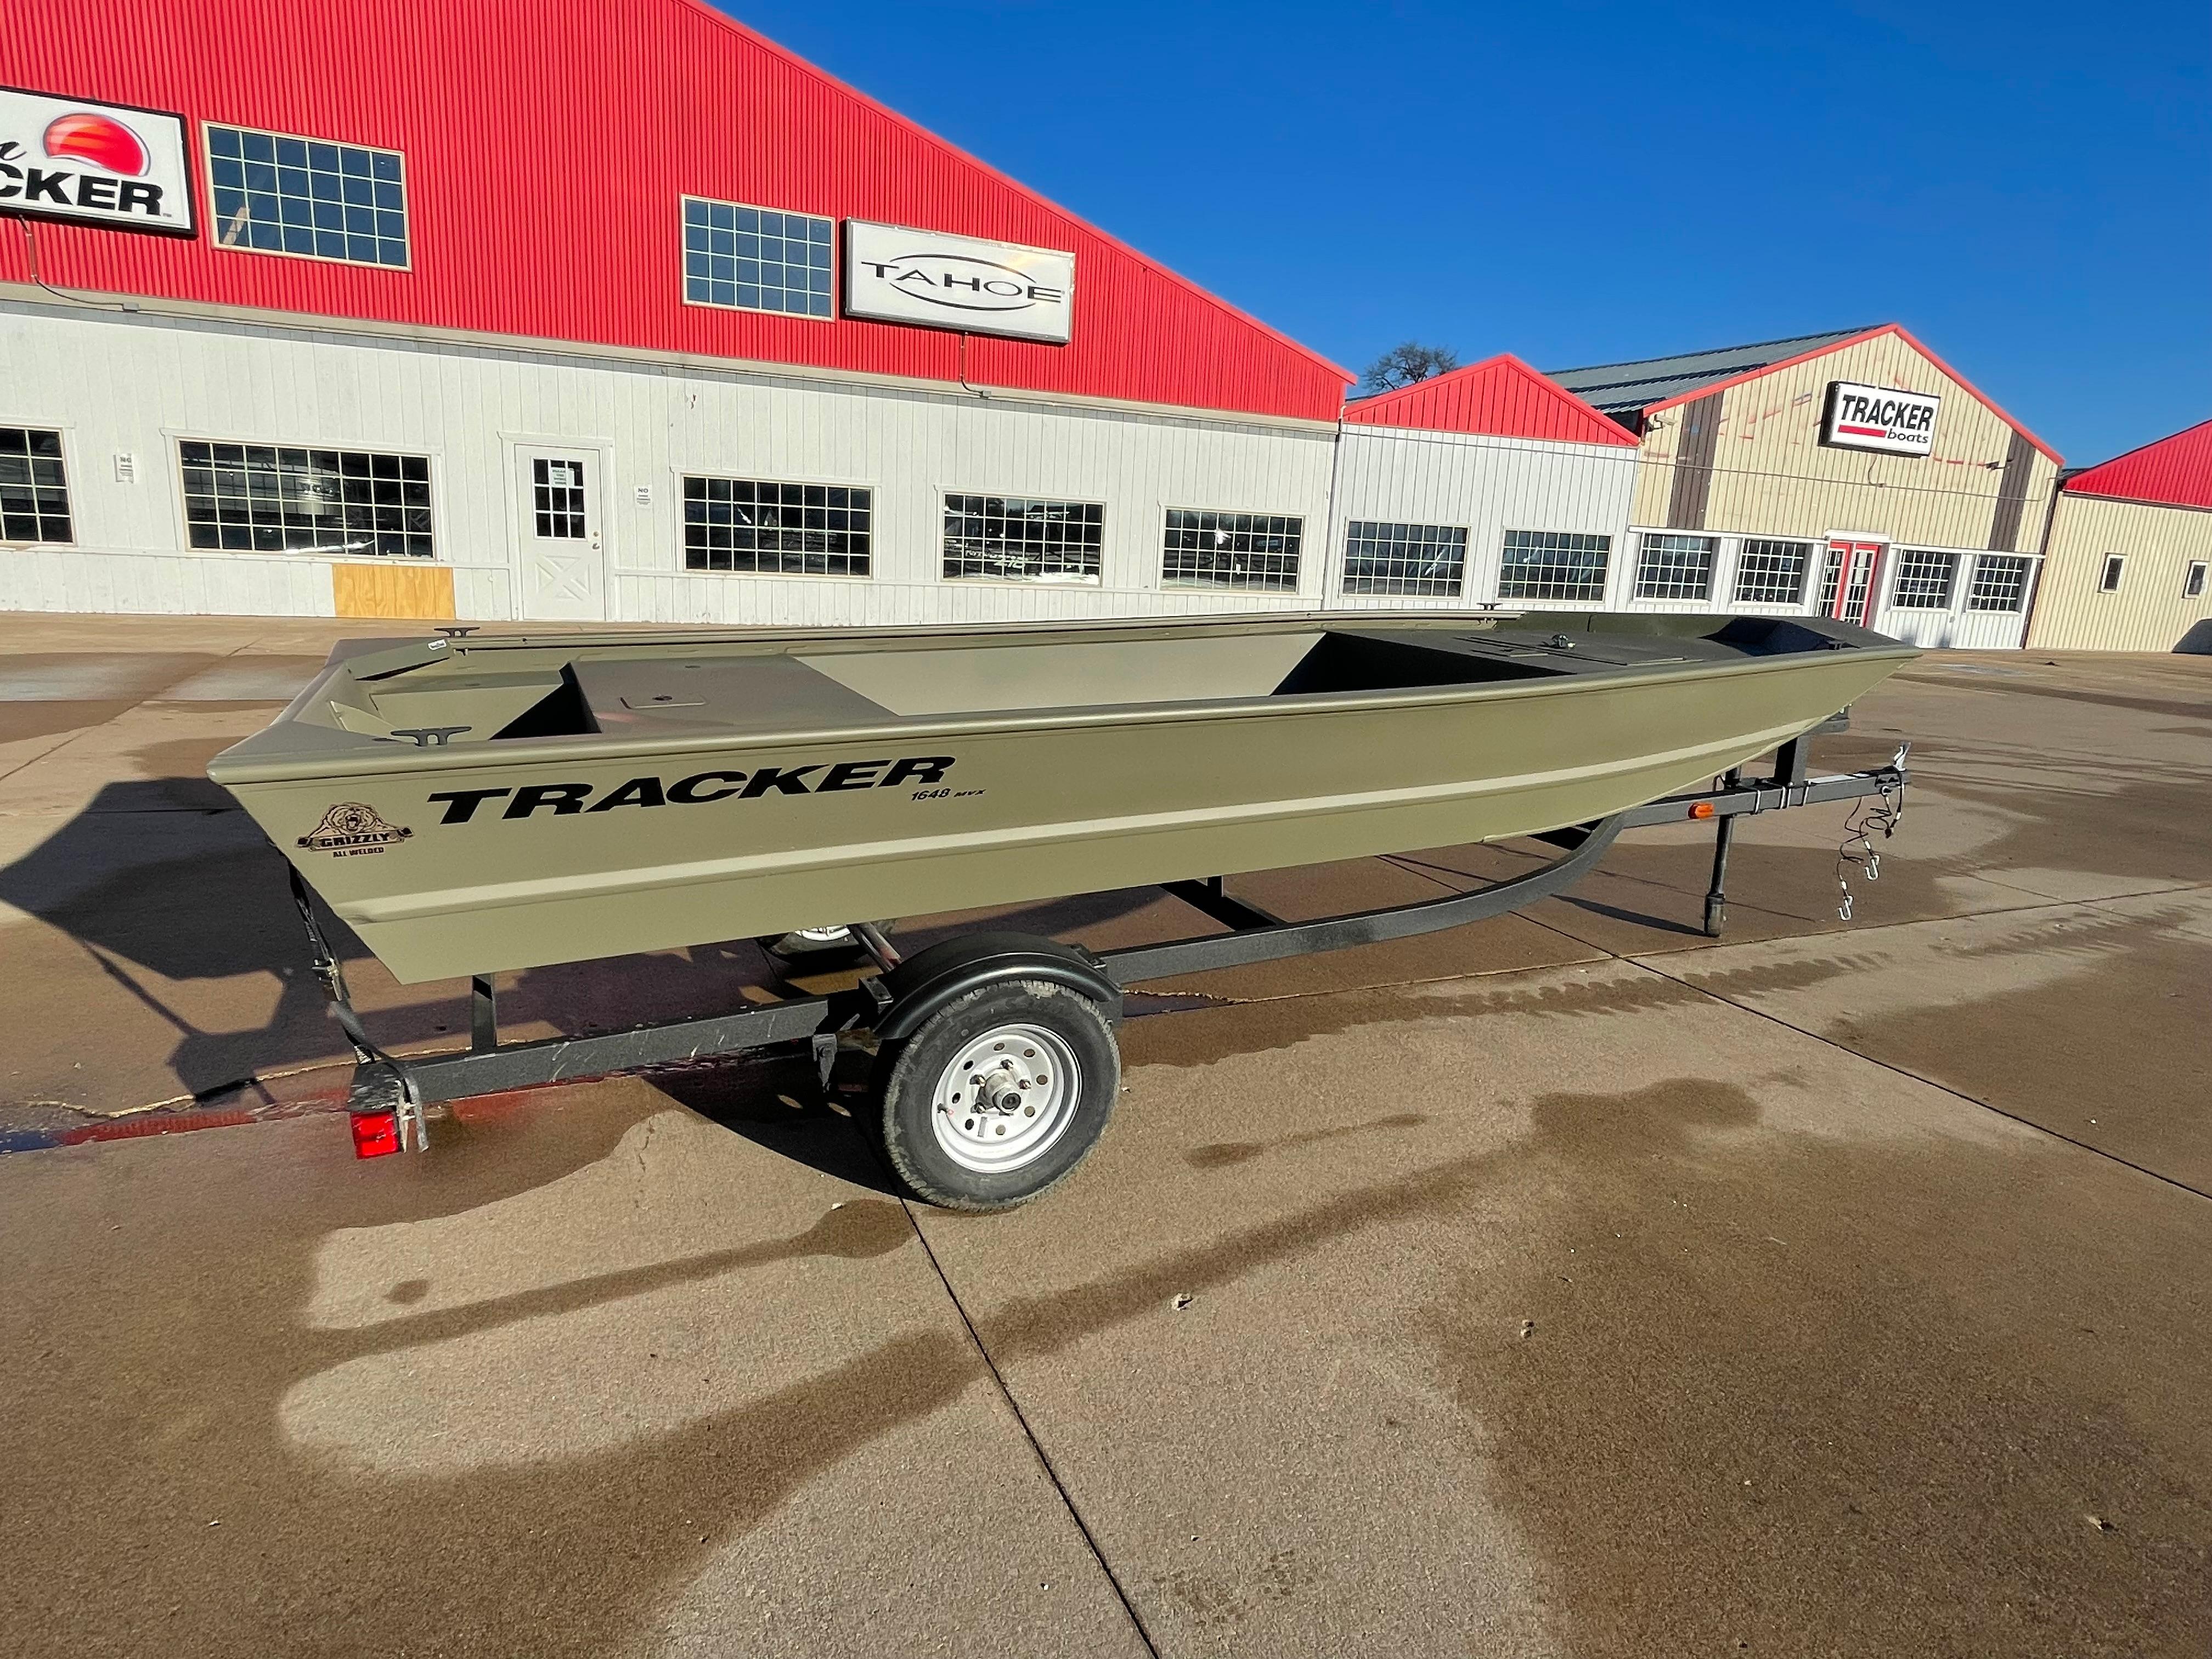 Explore Tracker Grizzly 1648 Jon Boats For Sale - Boat Trader